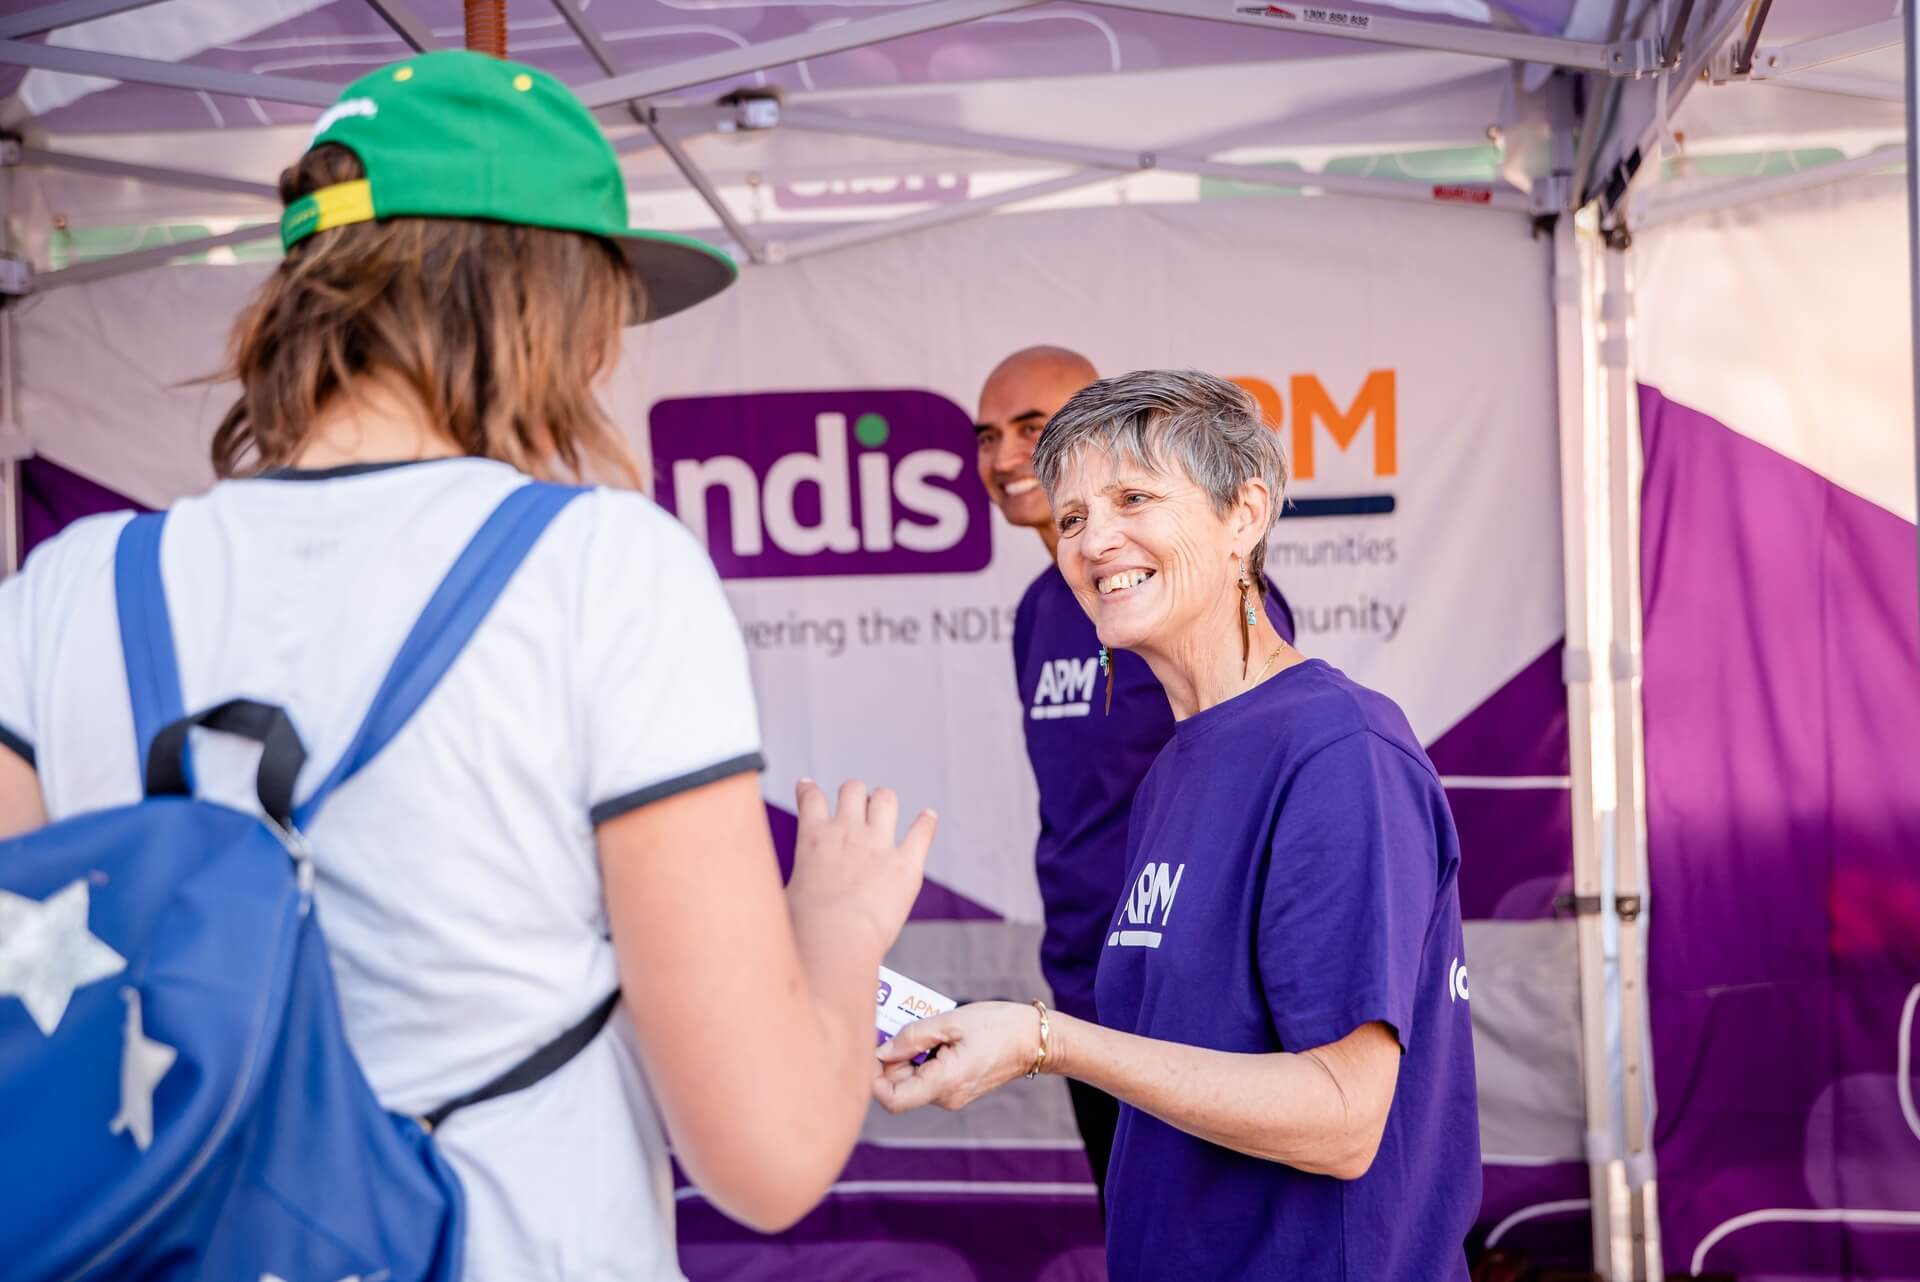 NDIS APM employee handing out cards smiling